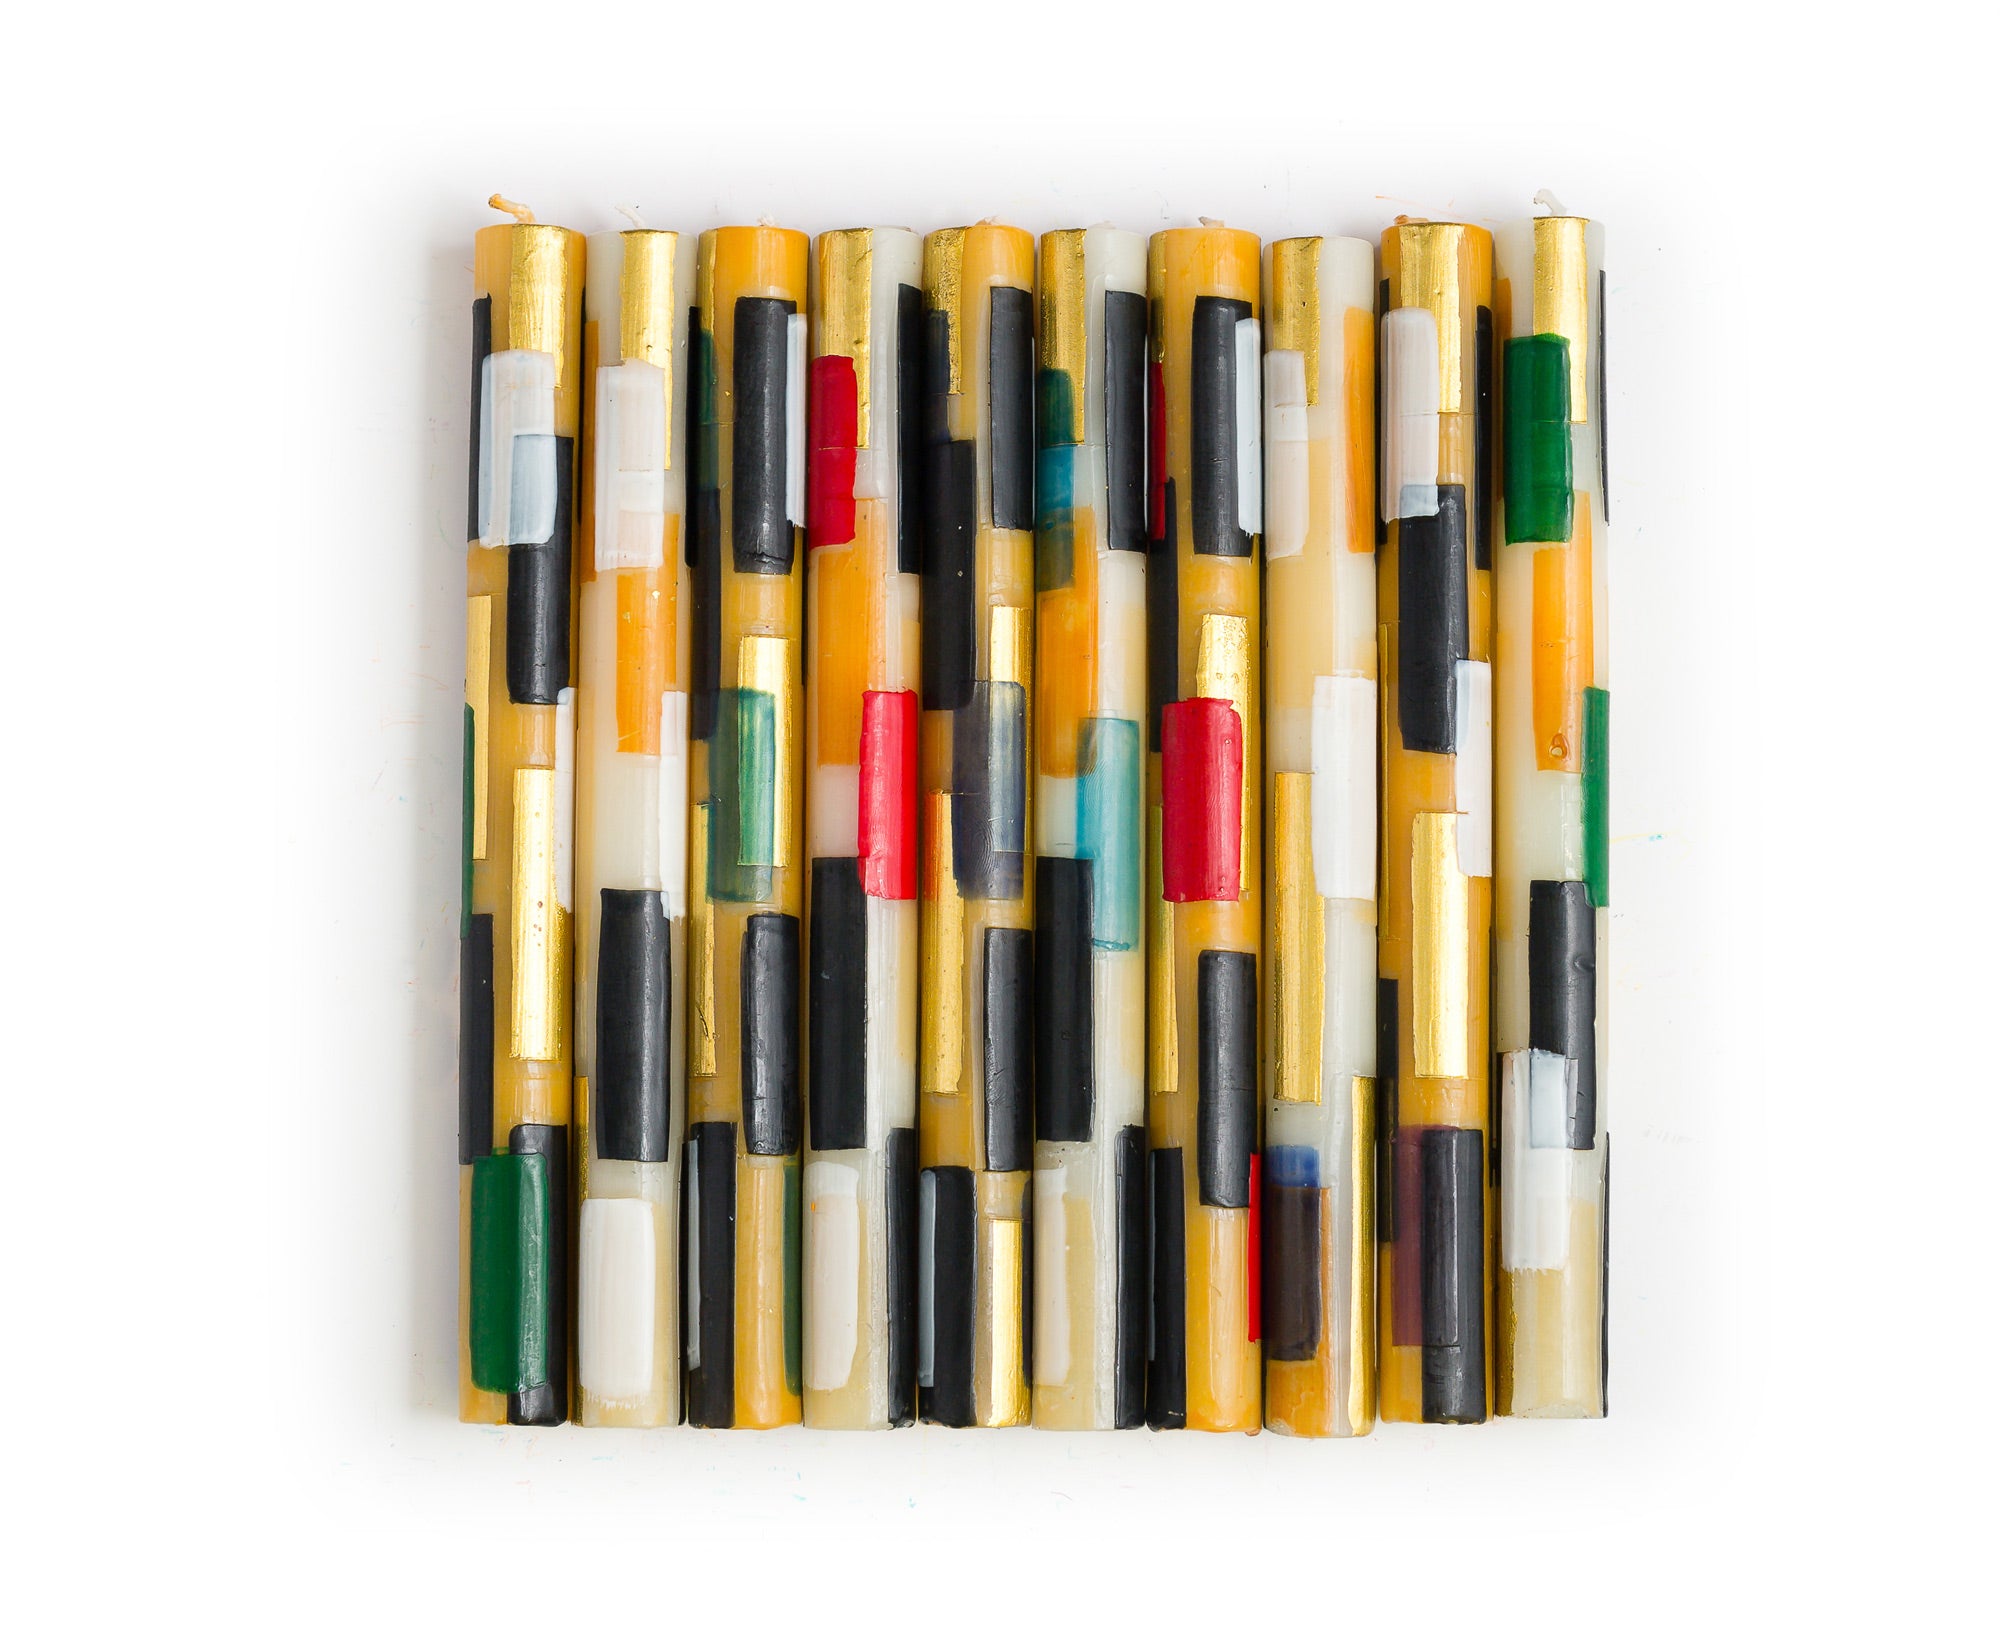 10 Klimt tapers one in each design of the collection. Cream & gold color tapers with rectangles of color; black, white, gold, consistent on all, then highlights of green, red, turquoise, dark blue, and forest green.